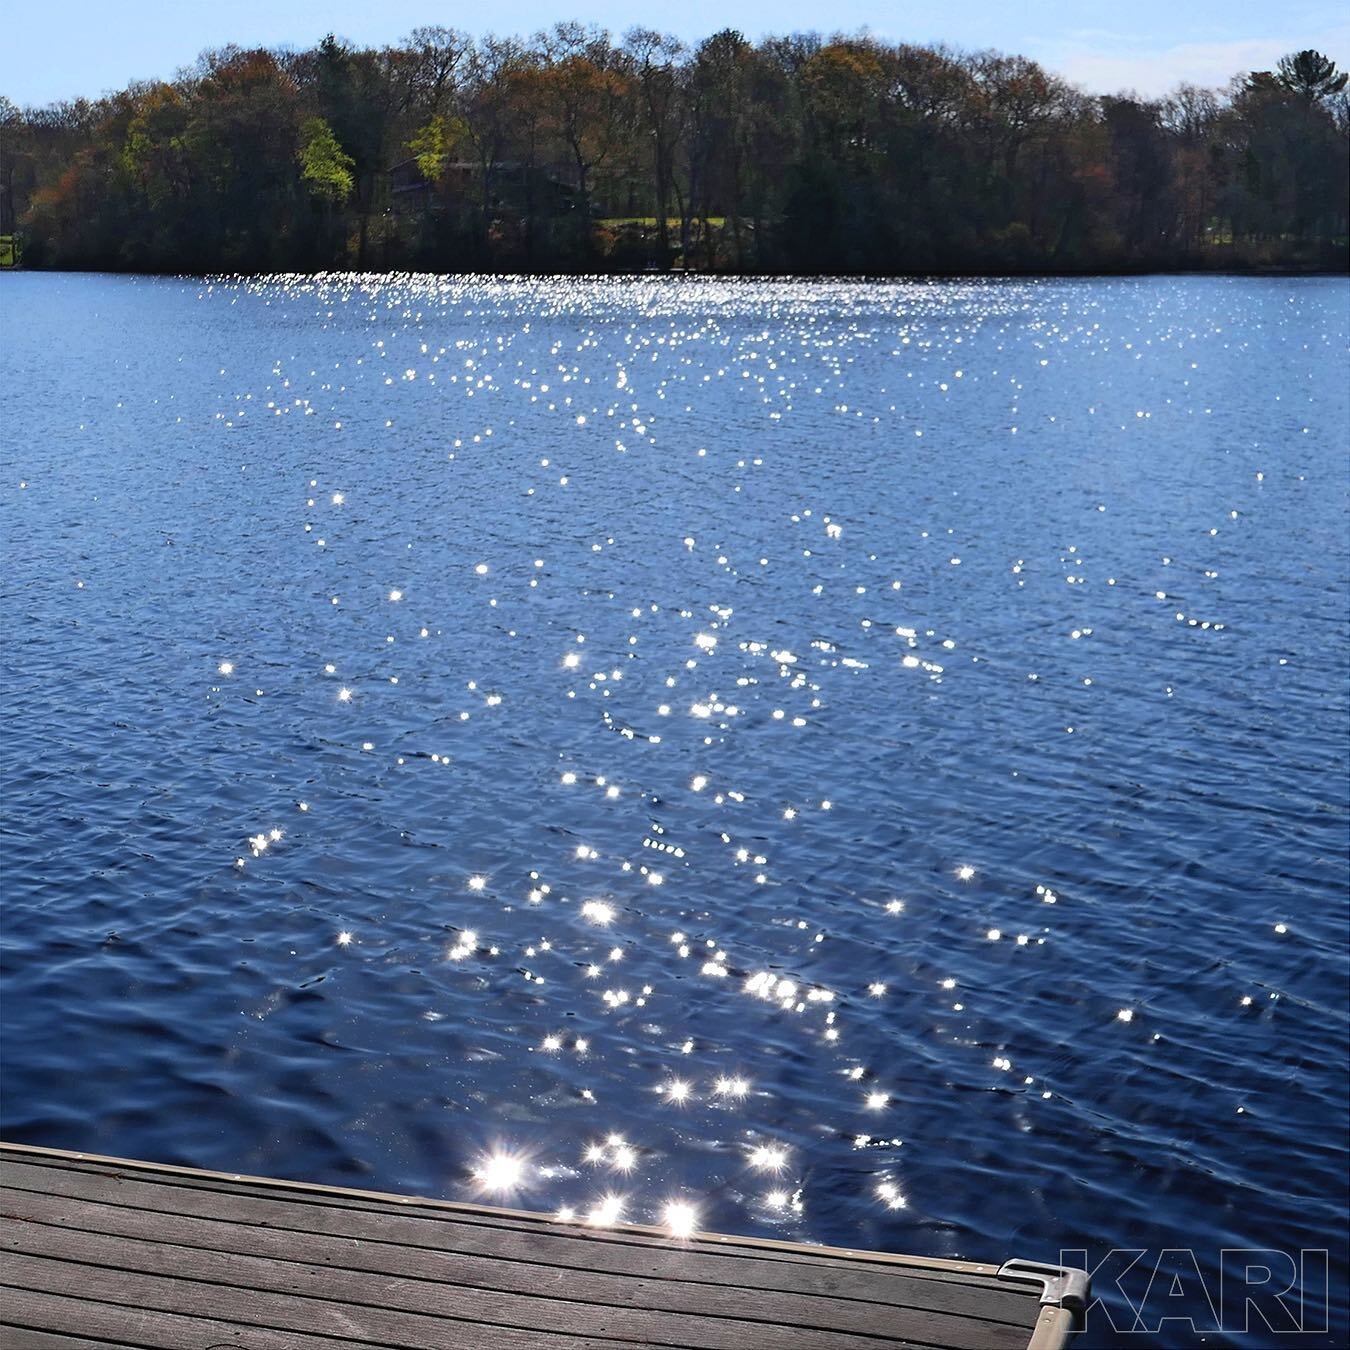 Glorious morning light comes tiptoeing toward me. 
Without me beckoning it. 
As if it knows how I feel.
Sondra
.
.
.
#capturethelight #lightphoto #lakeviews #poetryoflight #meditation #meditationnature #photography #artphoto #naturepeace #onlineart #